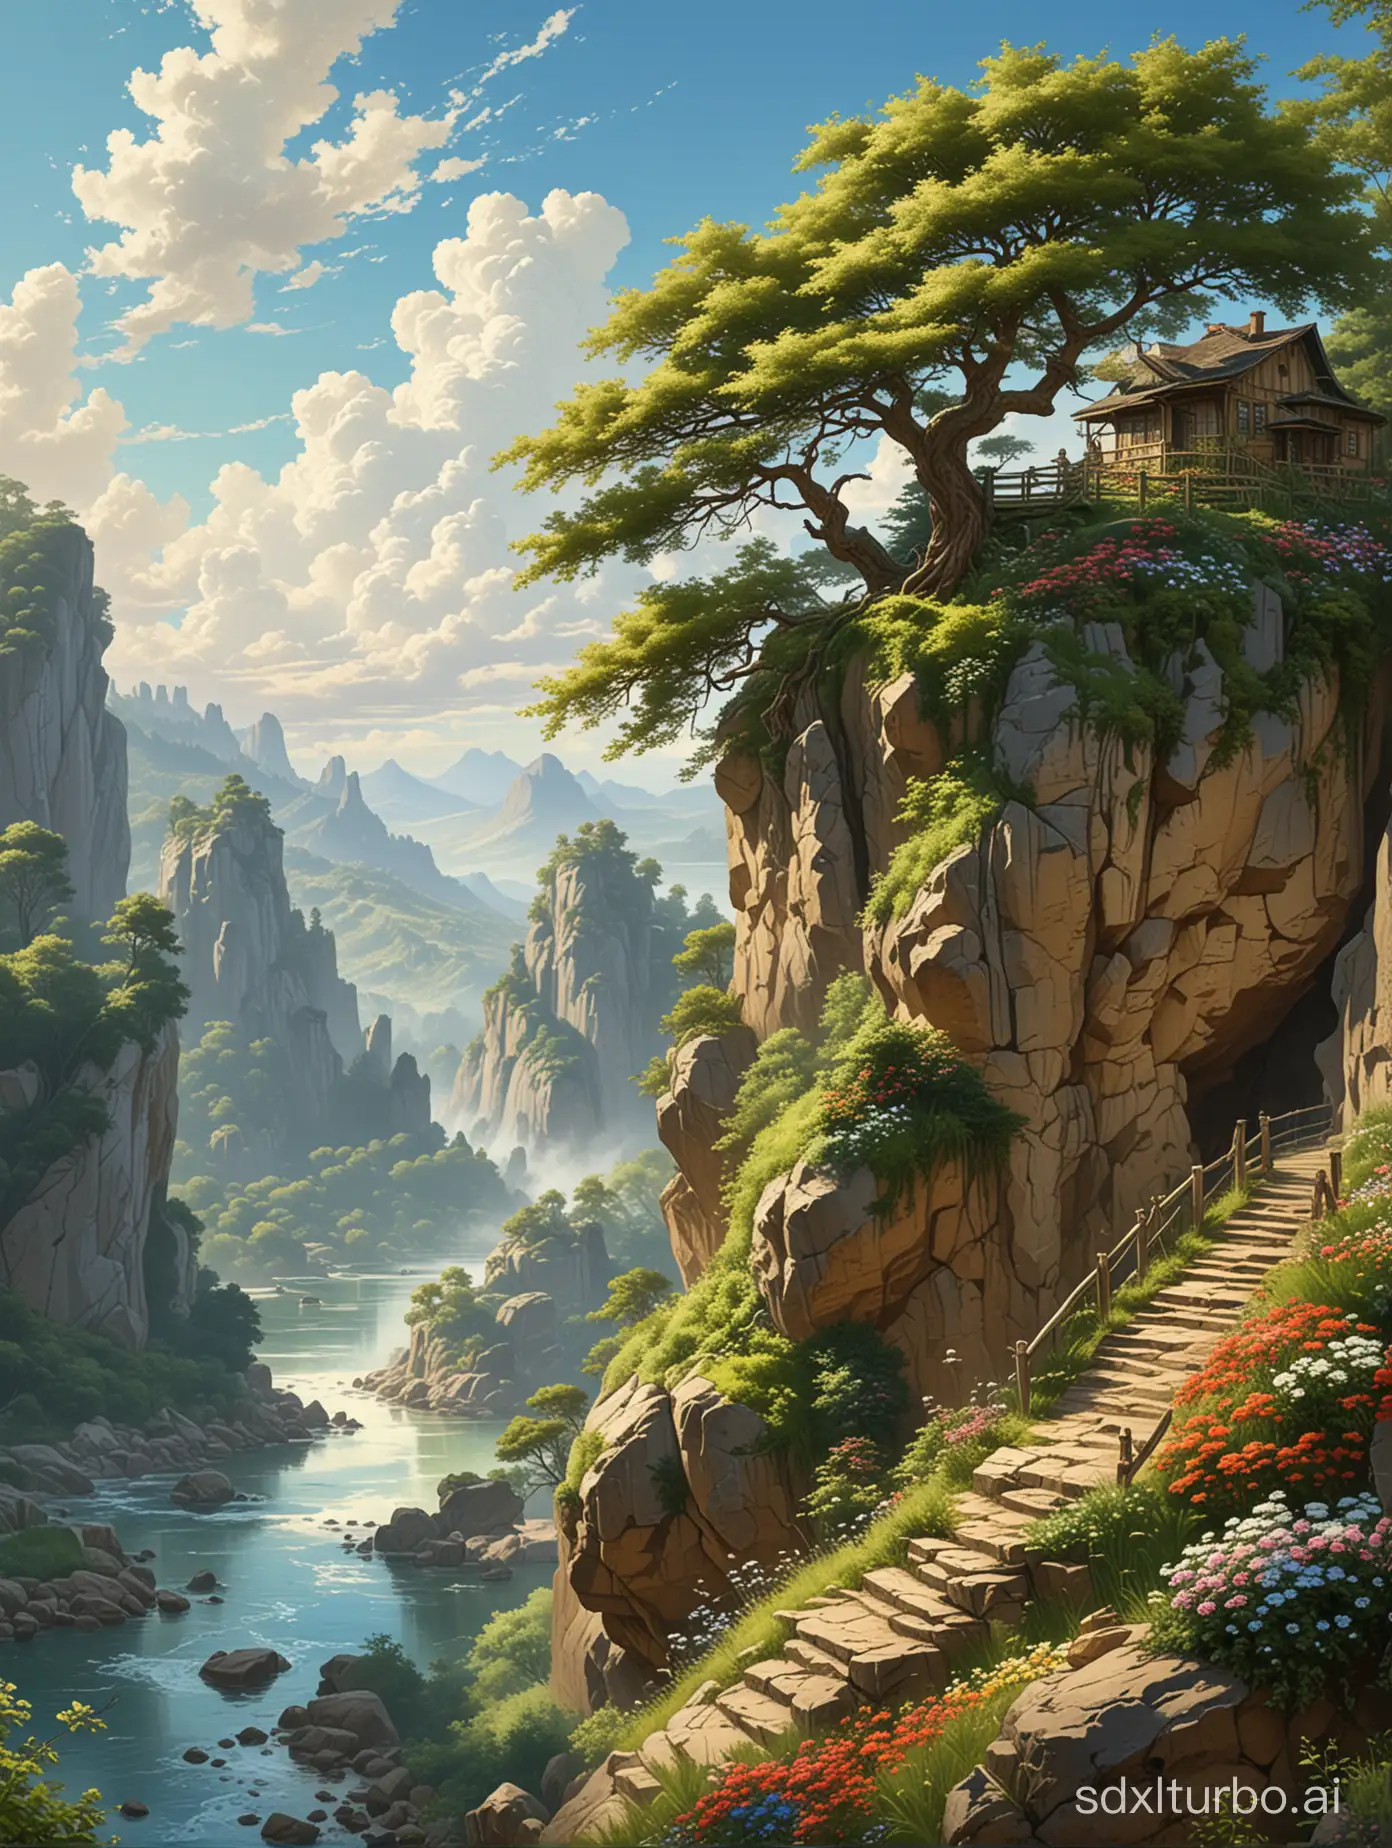 Create a stunning ultrarealistic painting in the style of Carl Spitzweg, depicting a single high cliff with a Volkswagen on the edge. Atop the rock, a majestic bonsai tree with intricate branches and foliage stands tall. A serene river flows gently beneath the rock, with wooden stairs leading to a tranquil pathway. The scene is adorned with an array of vibrant flowers, lush green grass, and an anime style of blue sky dotted with fluffy white clouds. The high angle view captures the beauty and grandeur of this idyllic landscape.